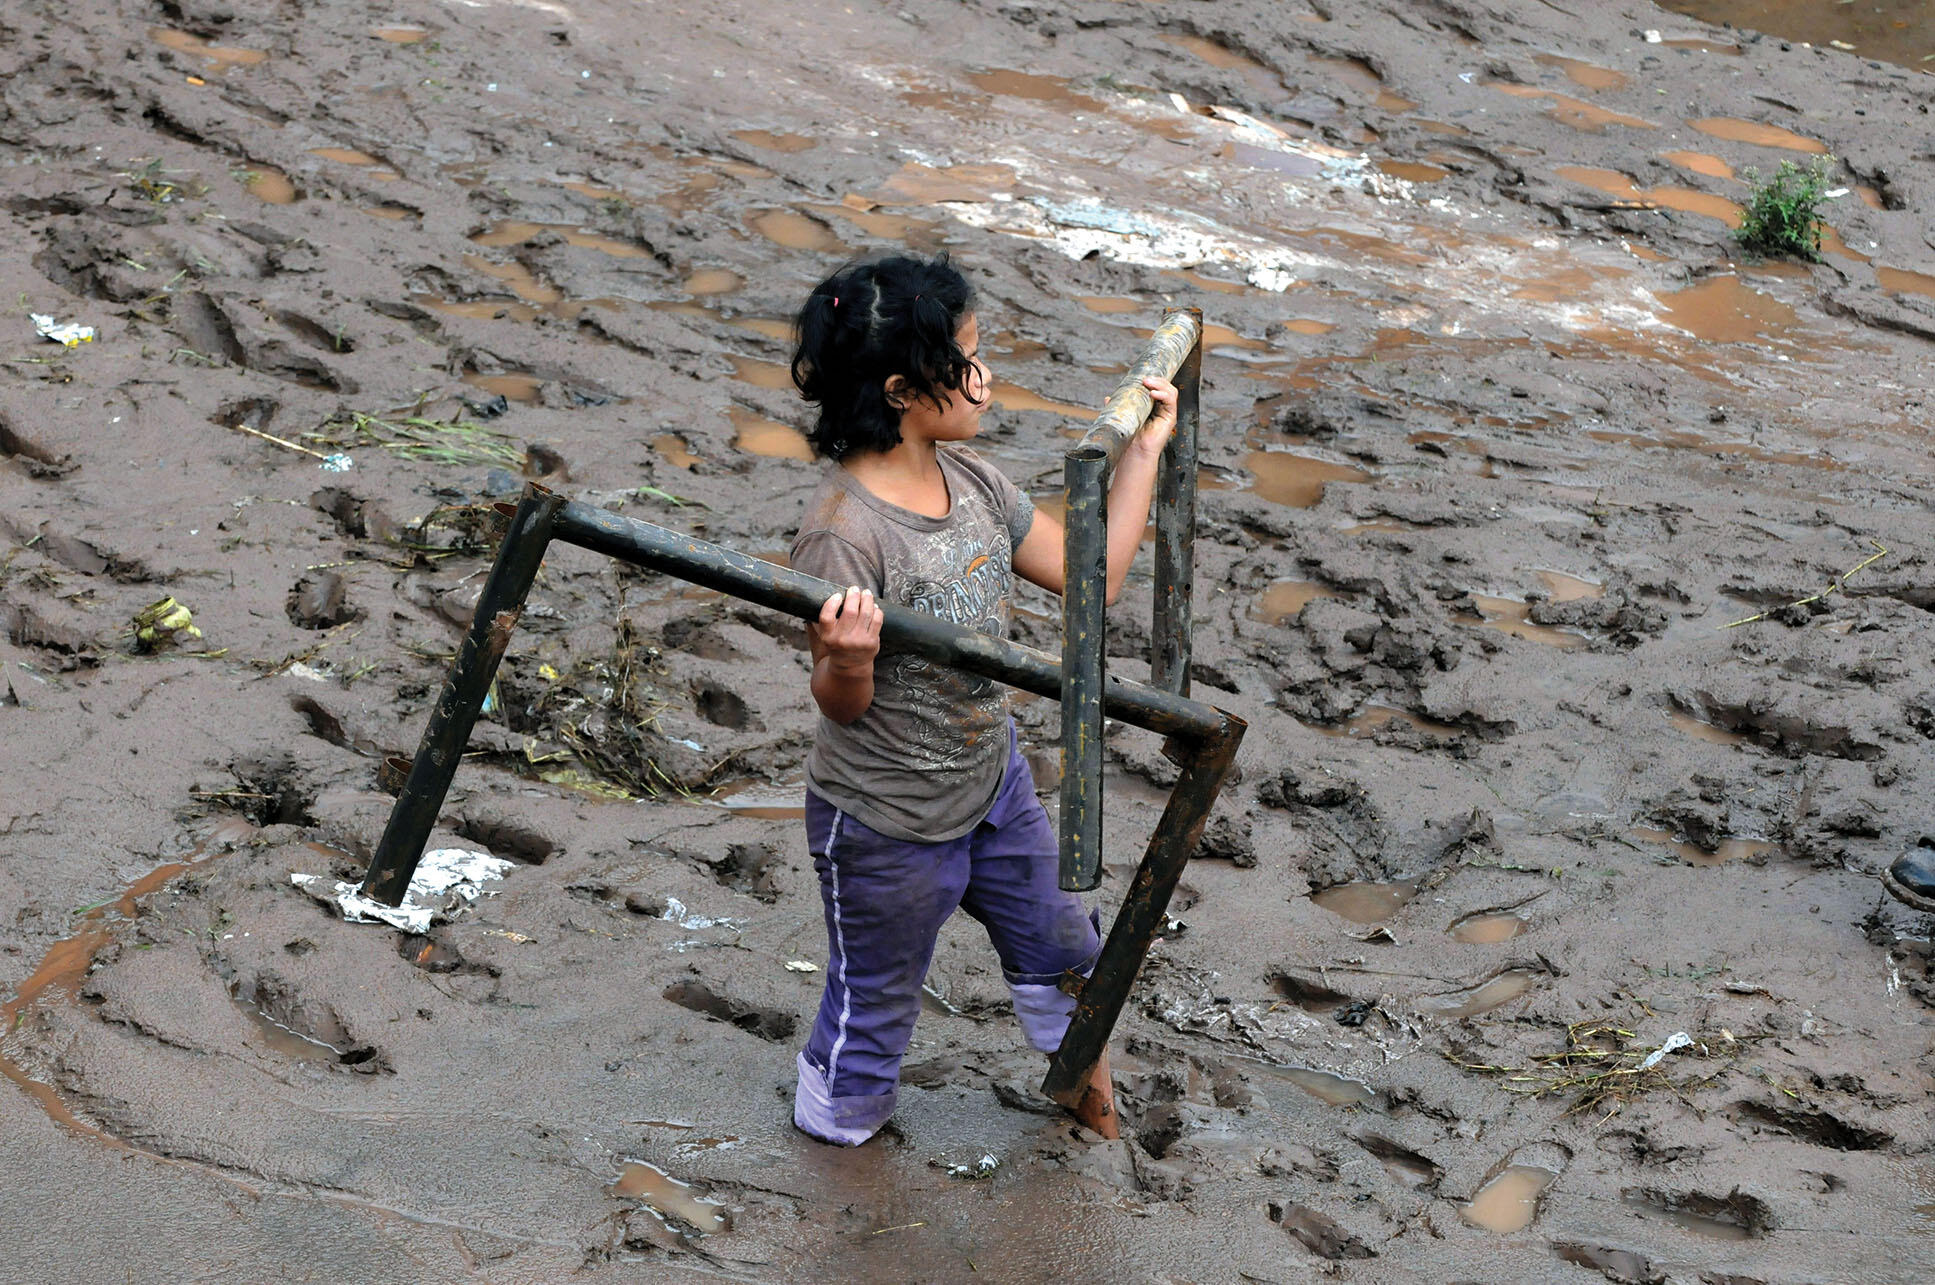 A young girl hauls away family possessions though deep mud after a flood in Honduras. (Photo by Globovision.)